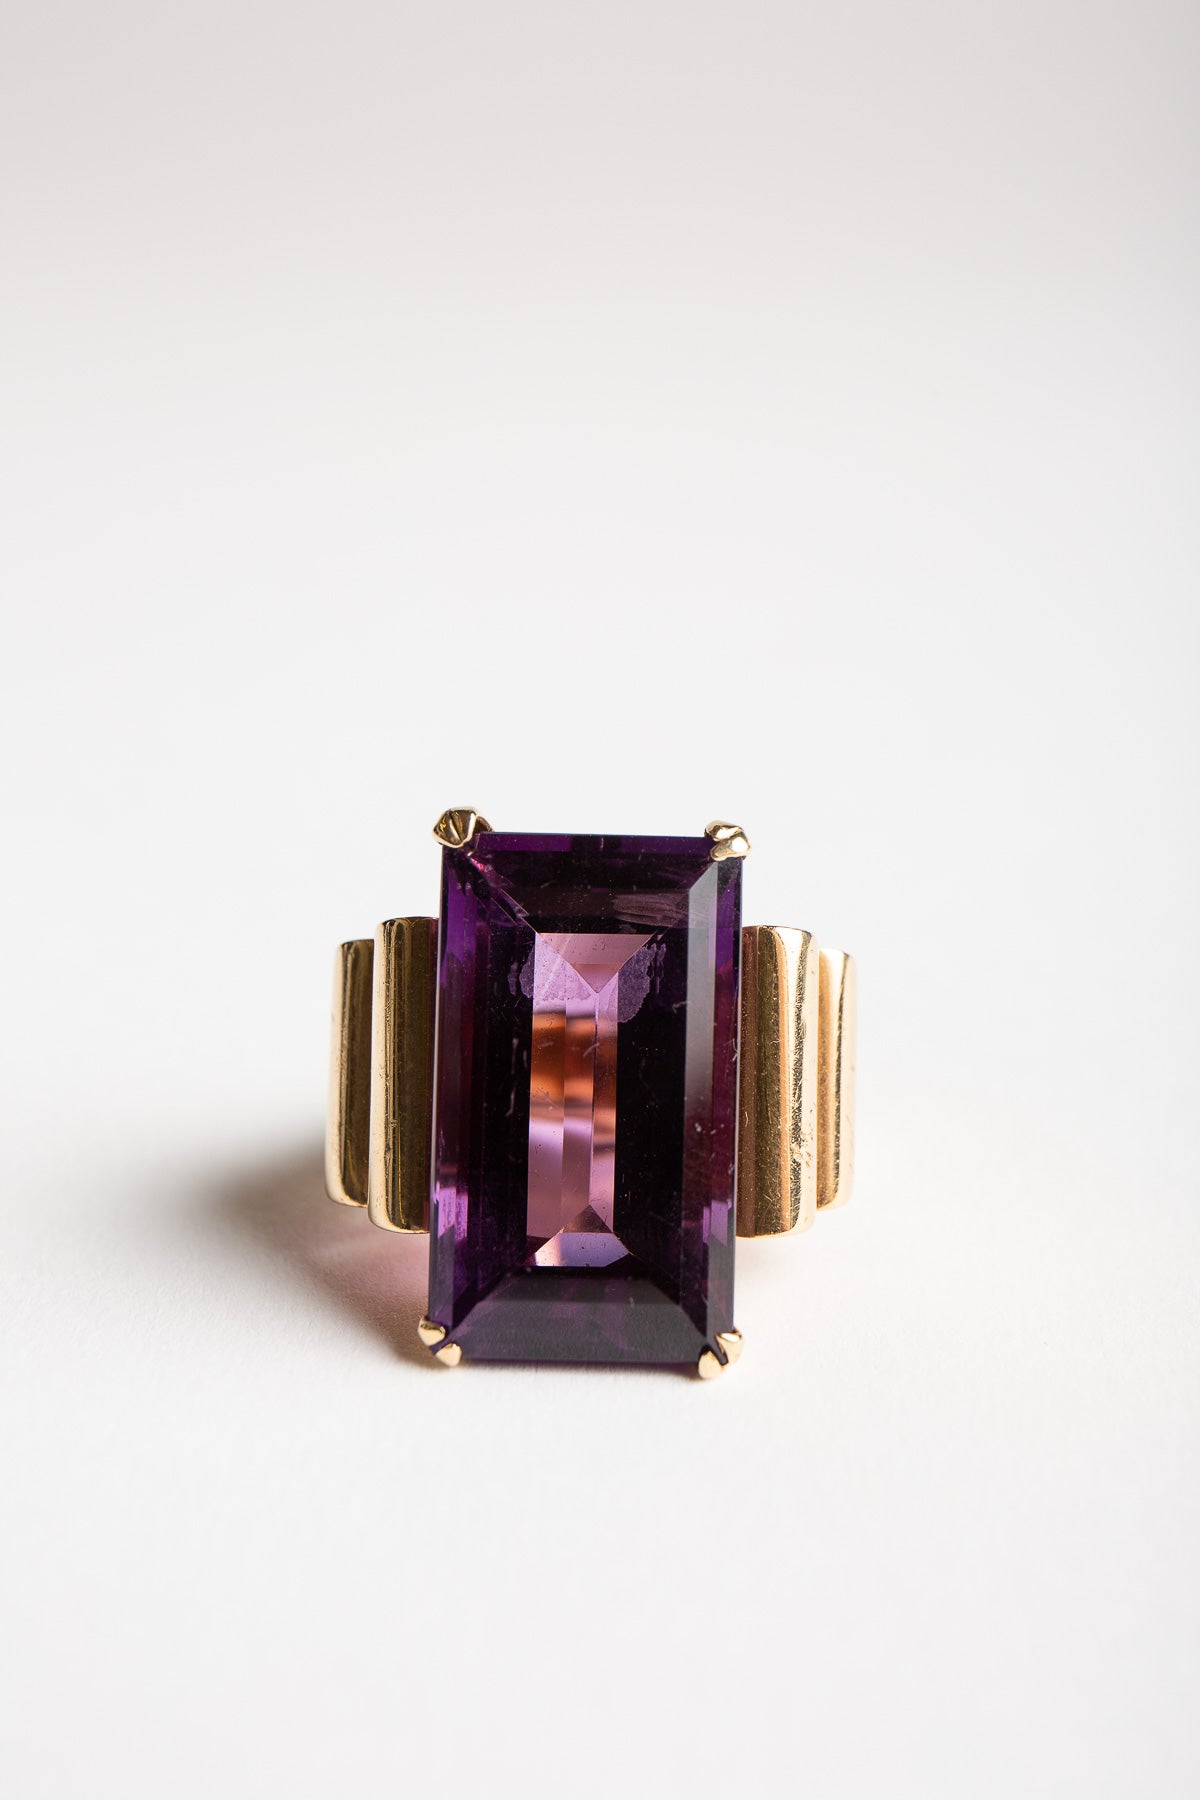 MAXFIELD PRIVATE COLLECTION | 1940'S AMETHYST RING